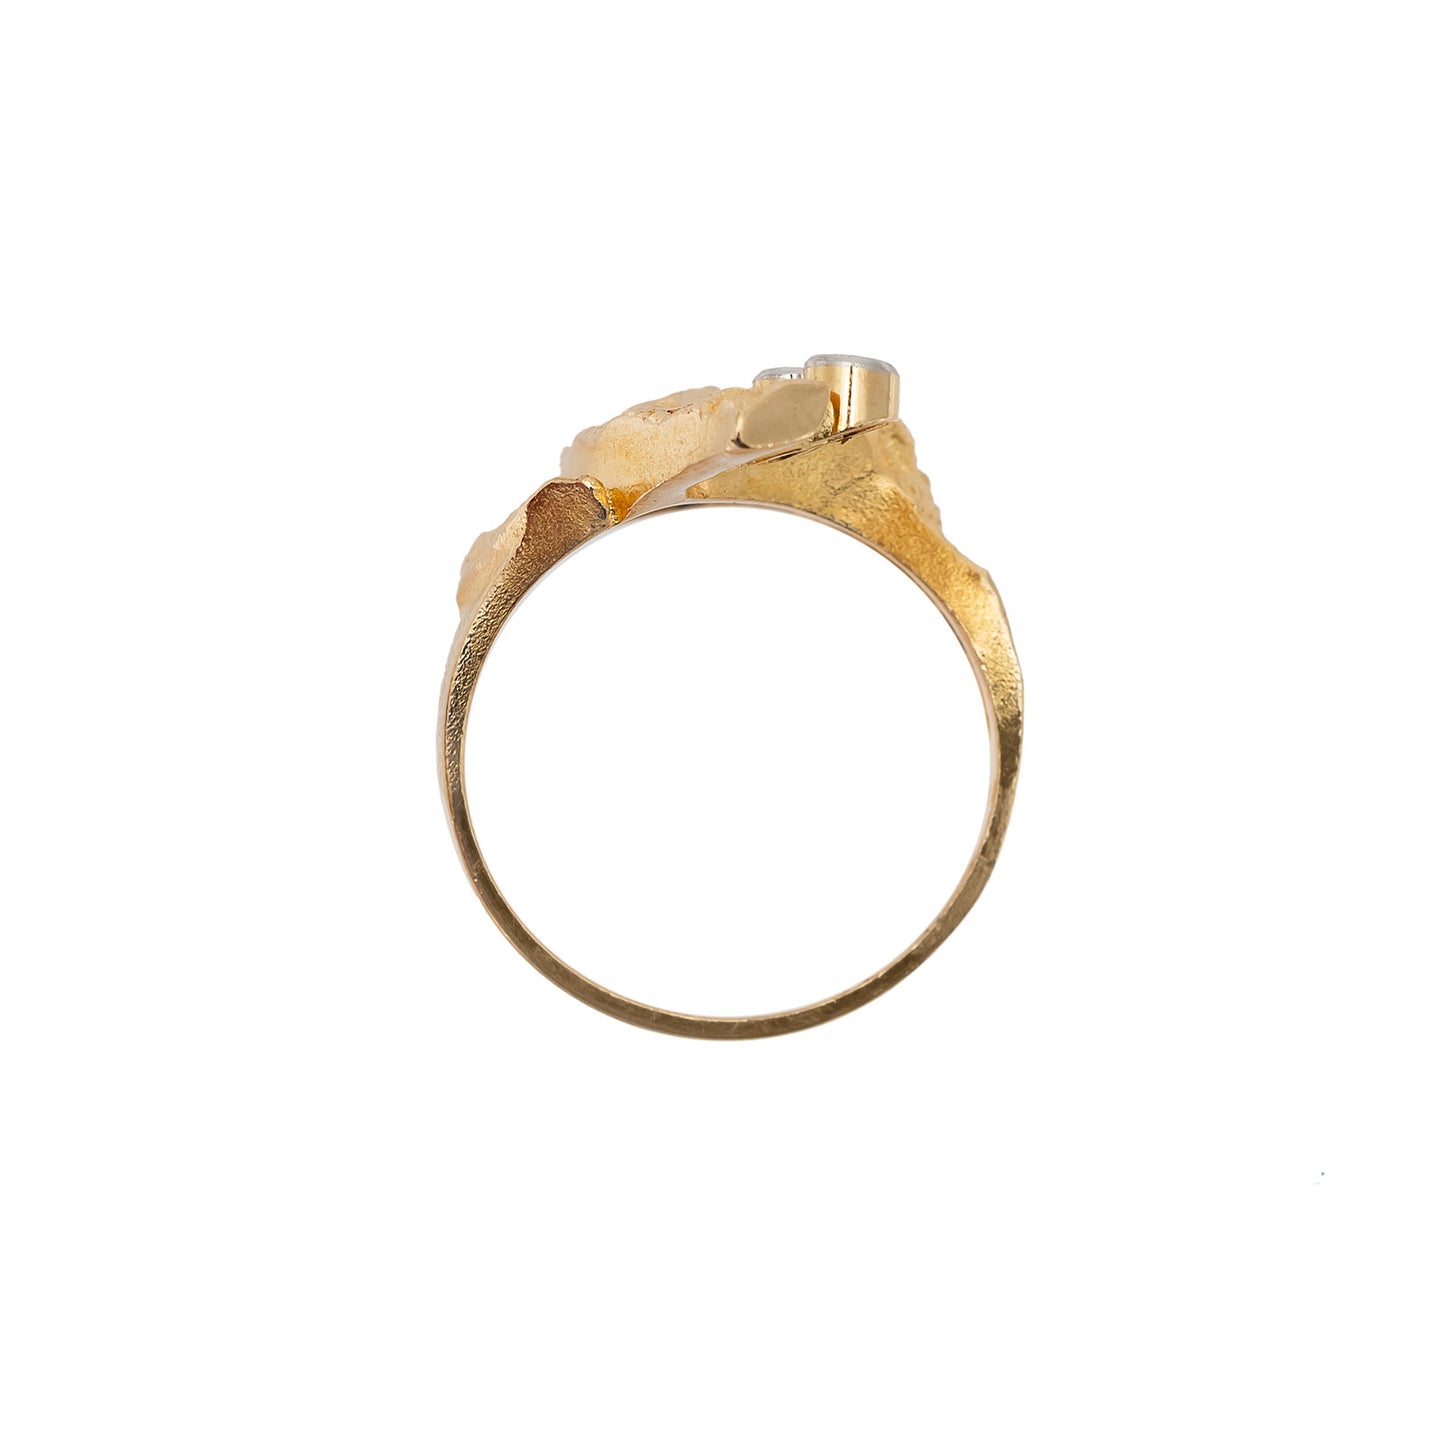 Lapponia Ring Vintage 1978 Diamond Twig Yellow Gold 750 Women's Ring Brand Jewelry